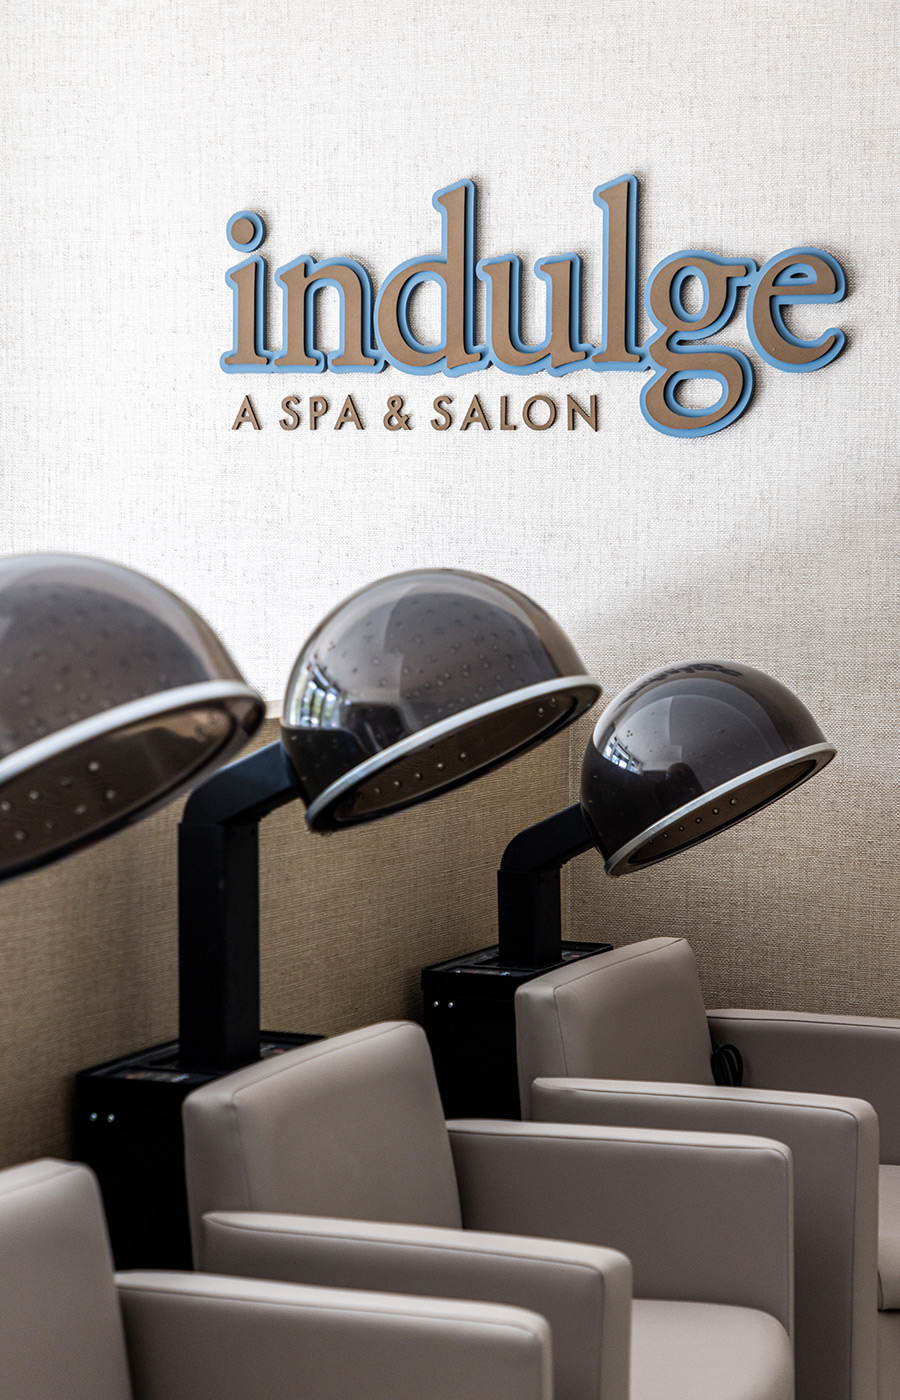 Salon hair dryers with Indulge Salon and Spa above it.